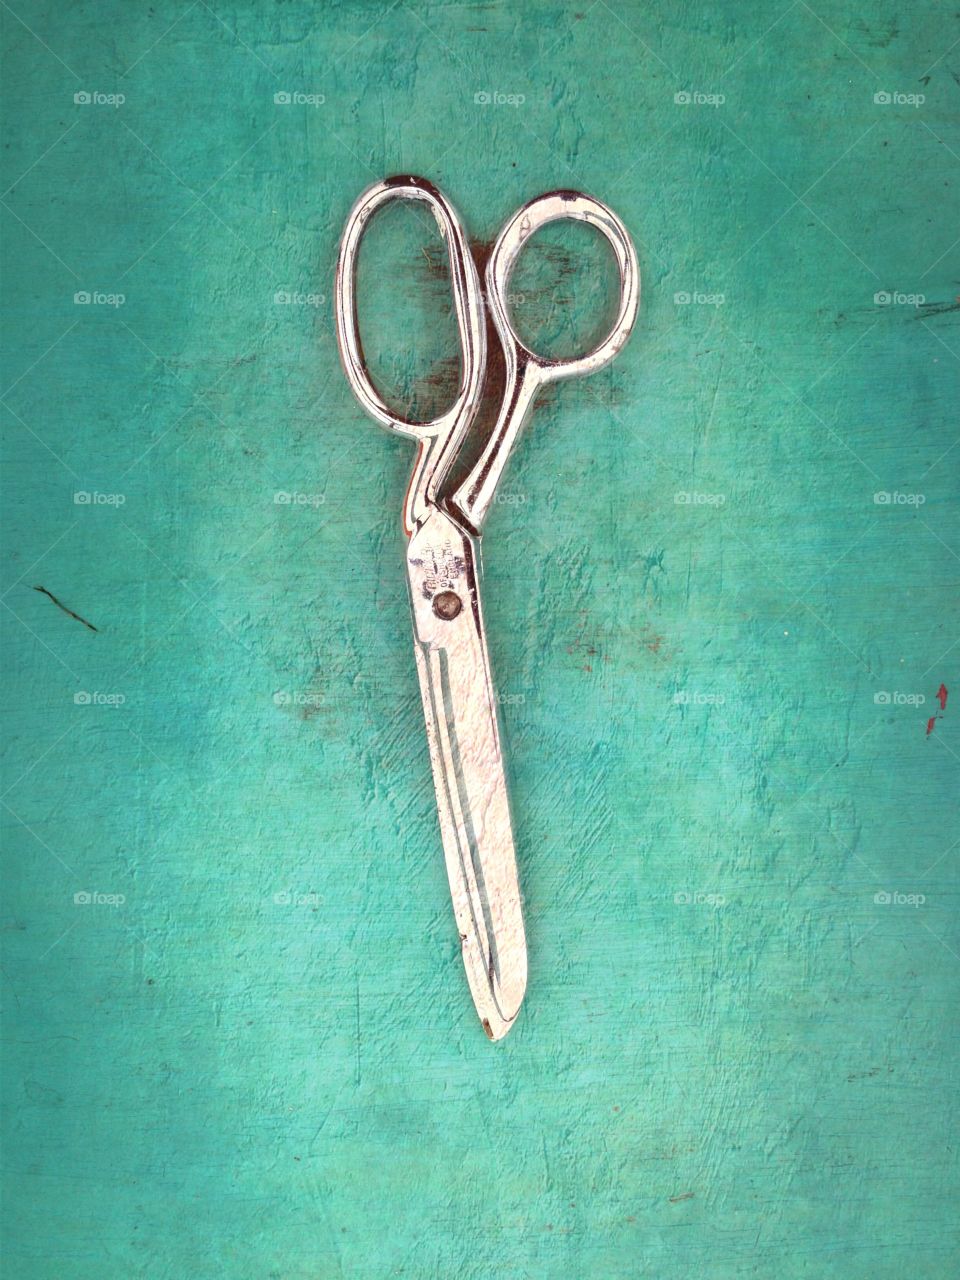 A pair of Scissors . A pair of scissors on a coloured wooden background 